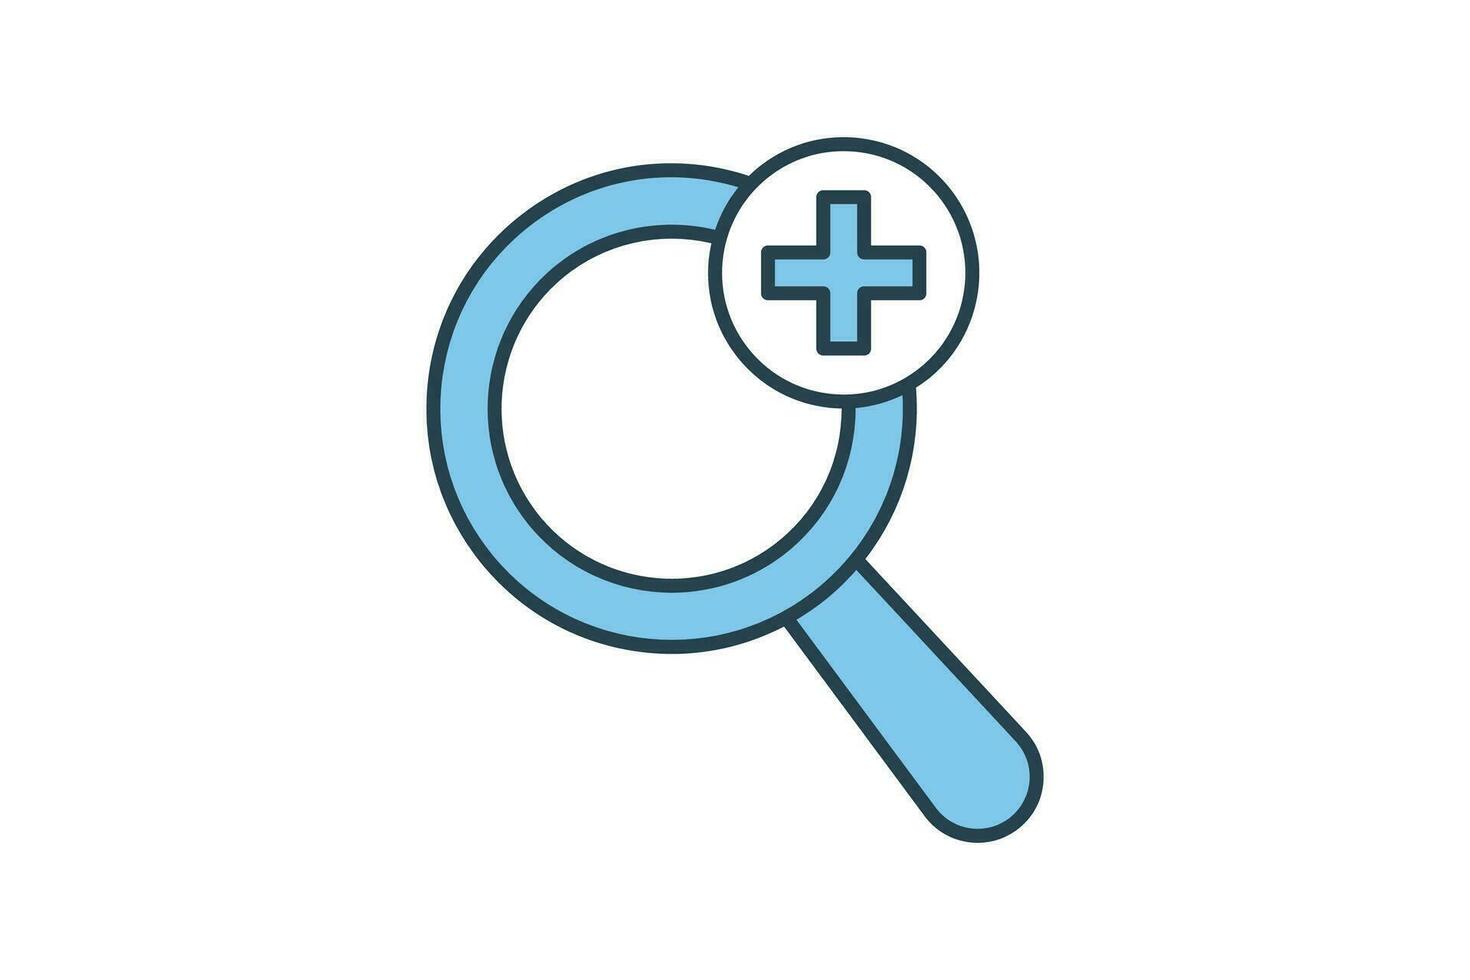 Advanced icon. Magnifying glass, search, plus sign. Flat line icon style design. Simple vector design editable